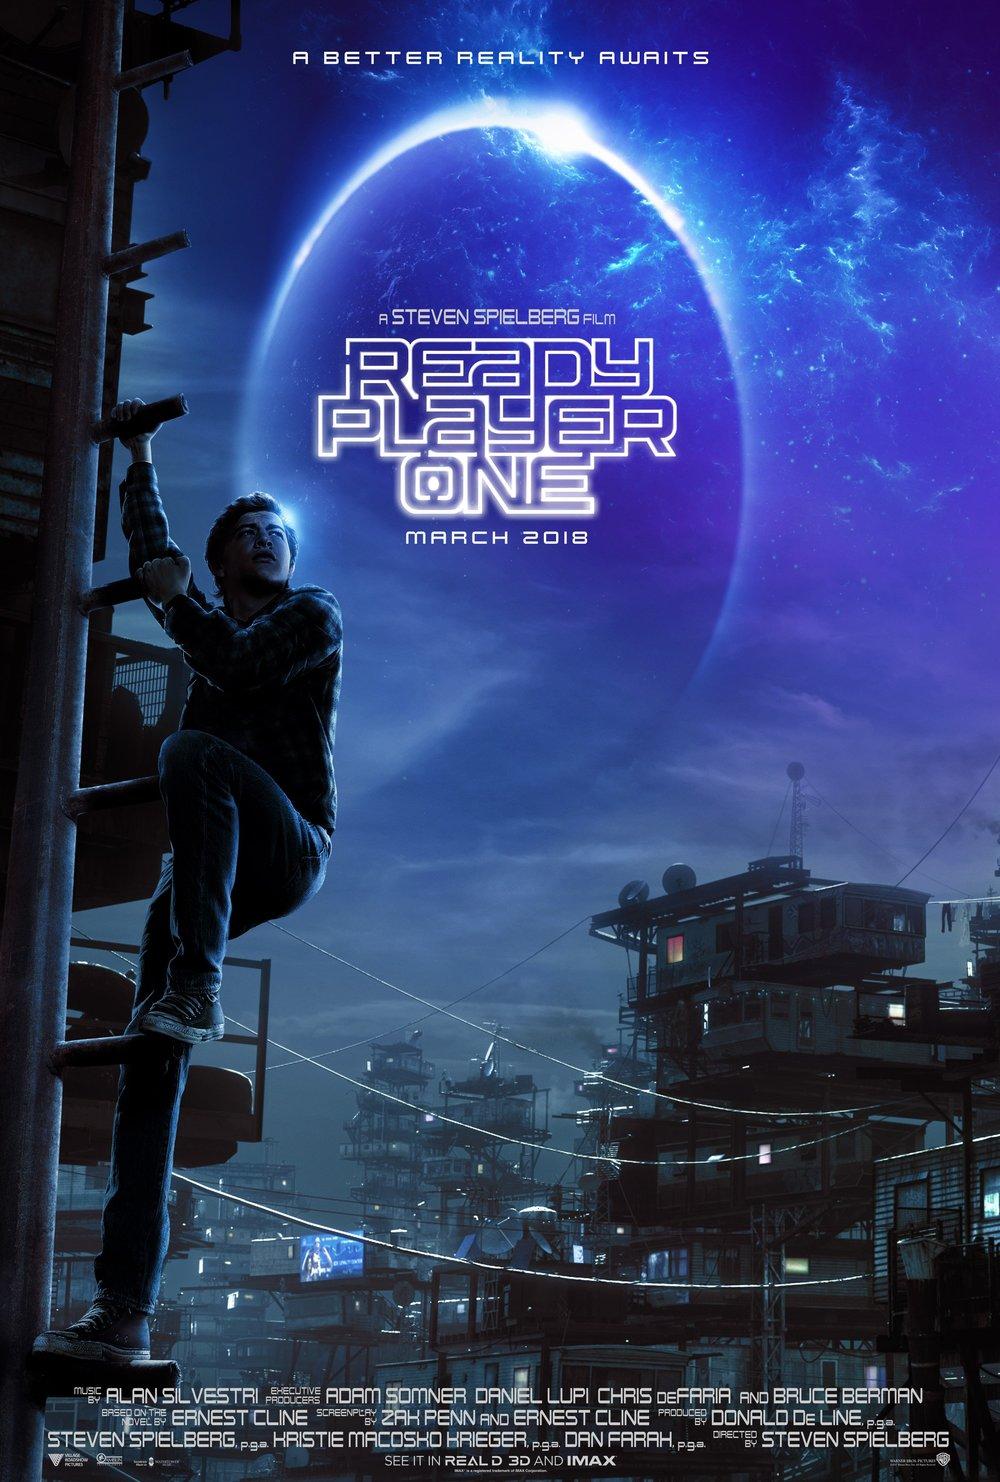 Ready Player One movie cast: Who are the young kids?, Films, Entertainment